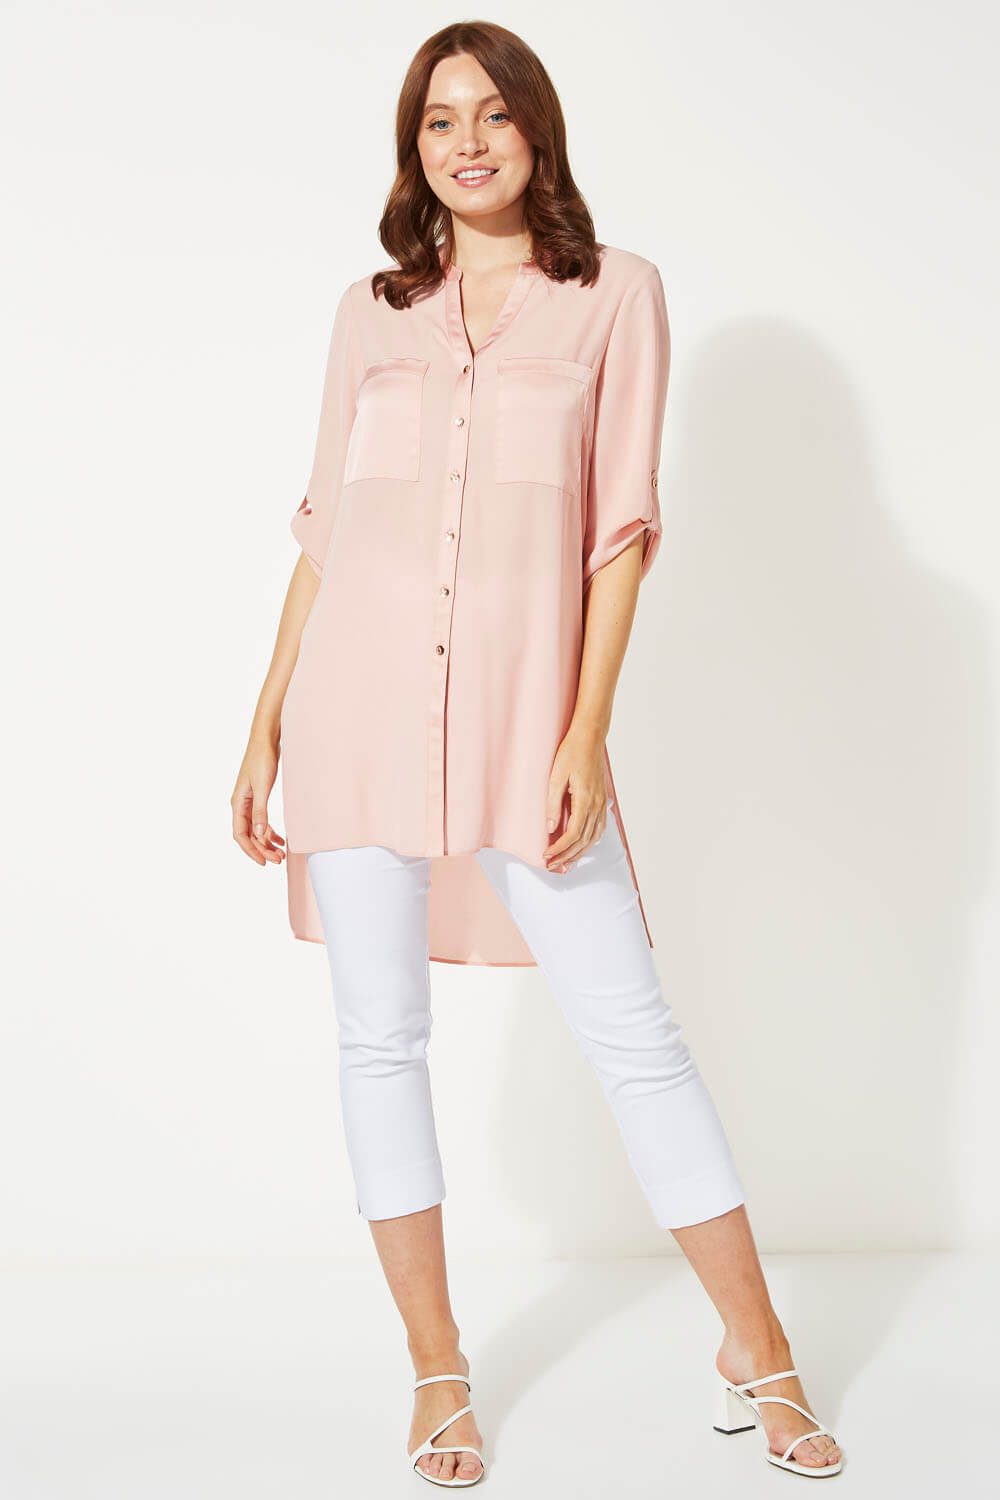 PINK Longline Button Through Blouse, Image 2 of 5